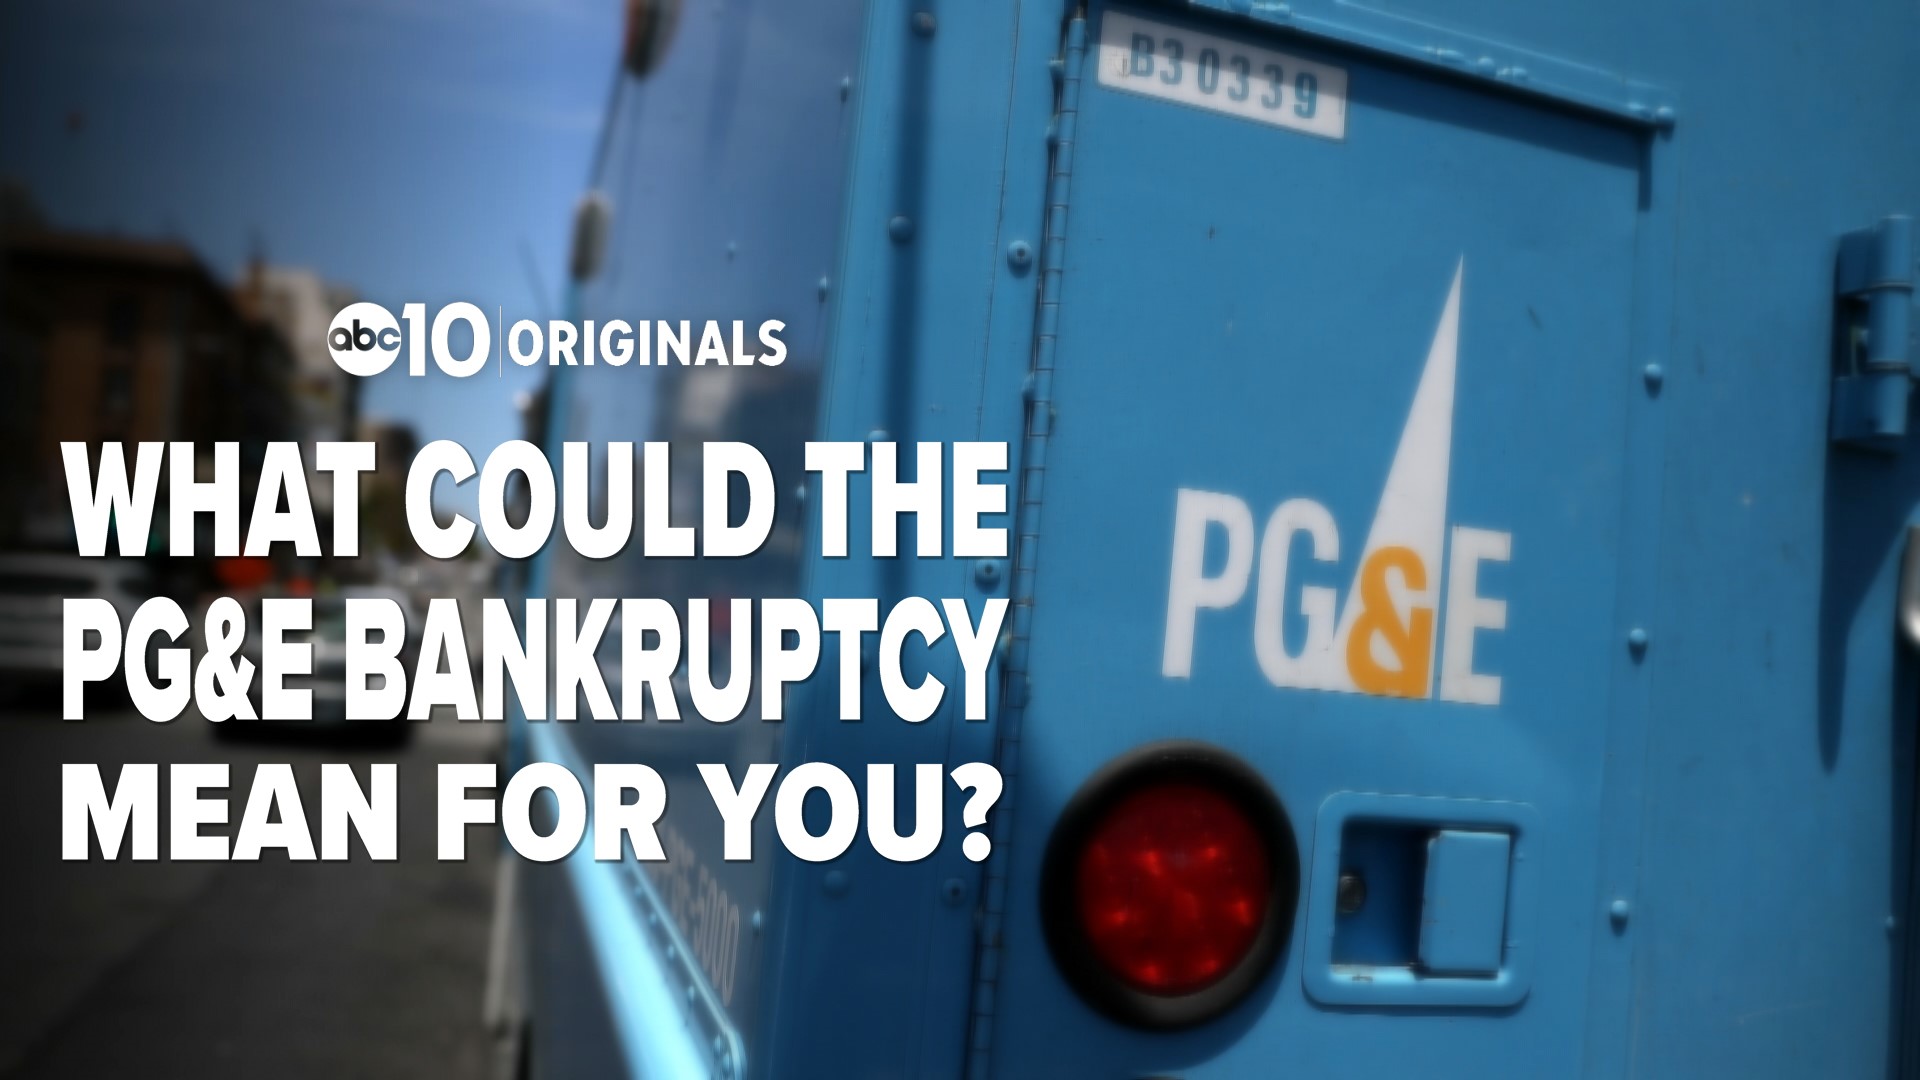 Pacific Gas & Electric could face any number of lawsuits tied to California wildfires, but on January 14th, PG&E announced their intent to file for Chapter 11 bankruptcy. What does that potentially mean for customers and litigants?